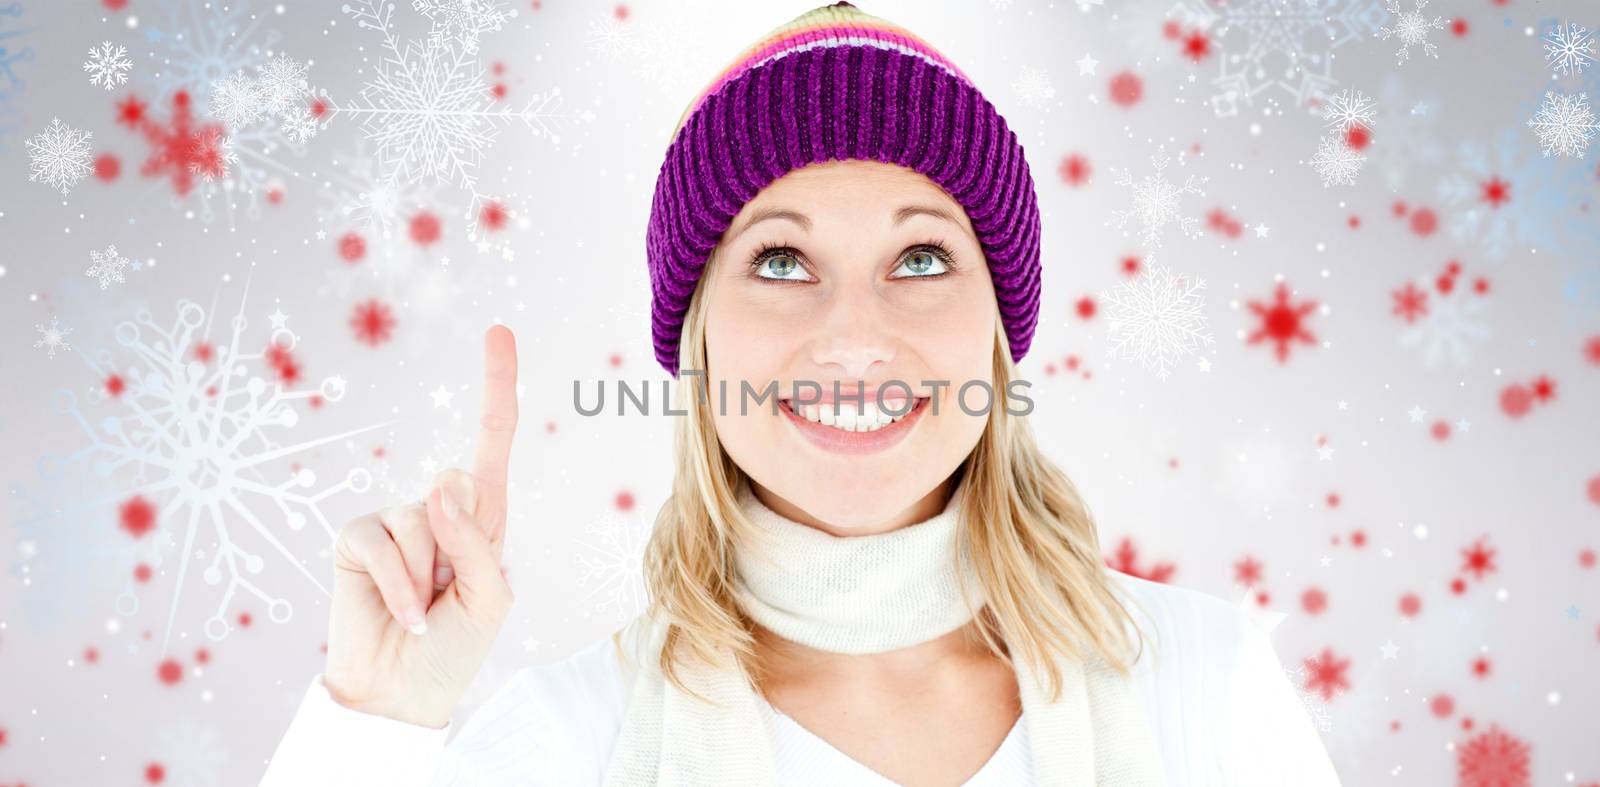 Composite image of bright woman with a colorful hat pointing upwards by Wavebreakmedia